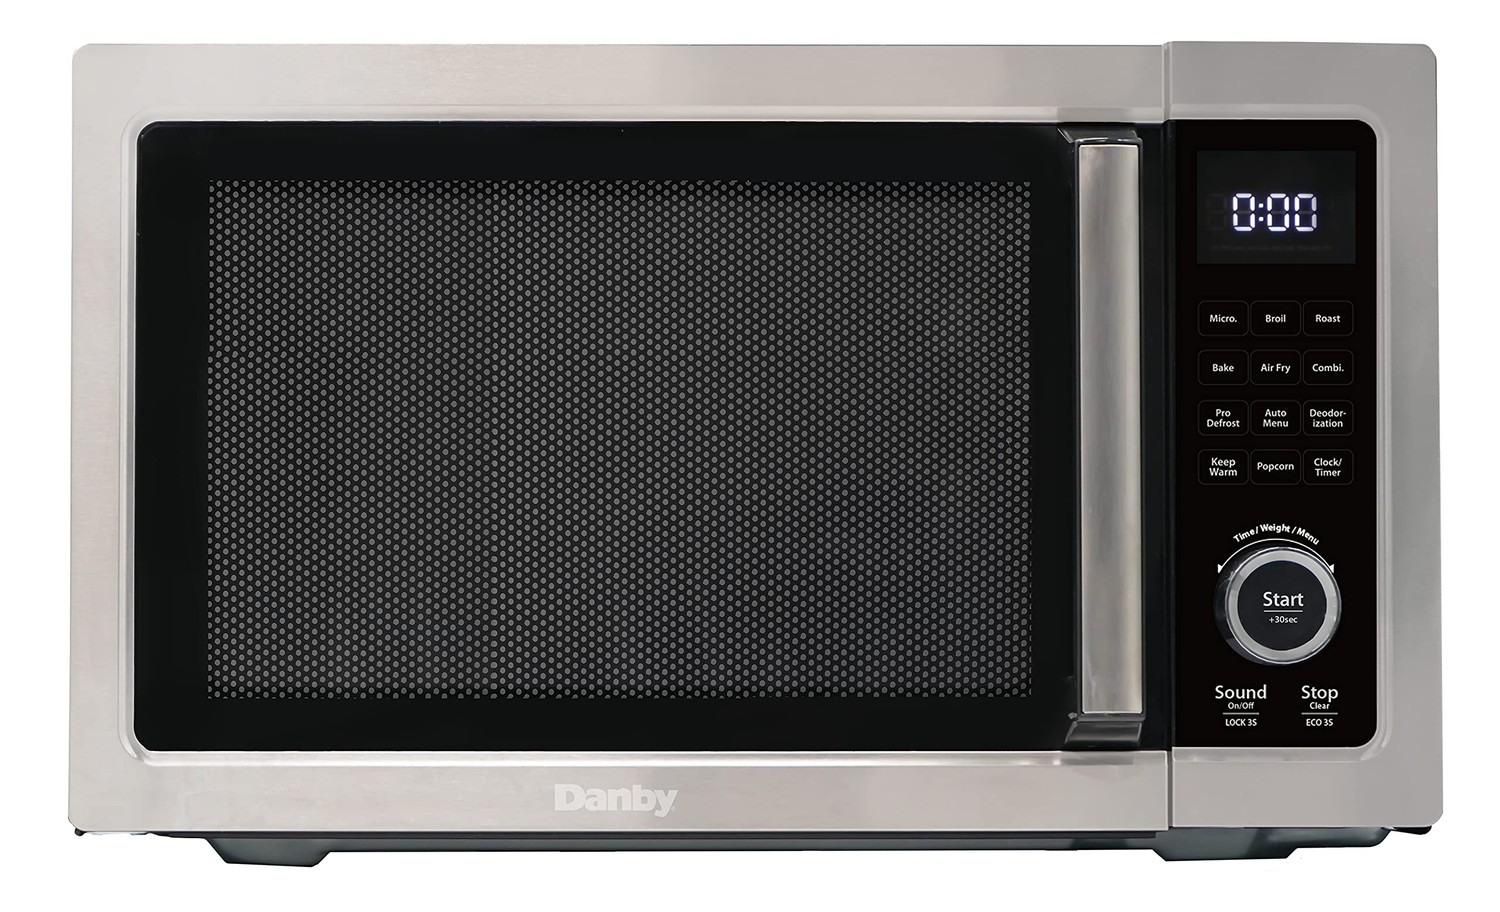 5-in-1 Microwave Oven with Air Fry, Convection Roast/Bake, Broil/Grill